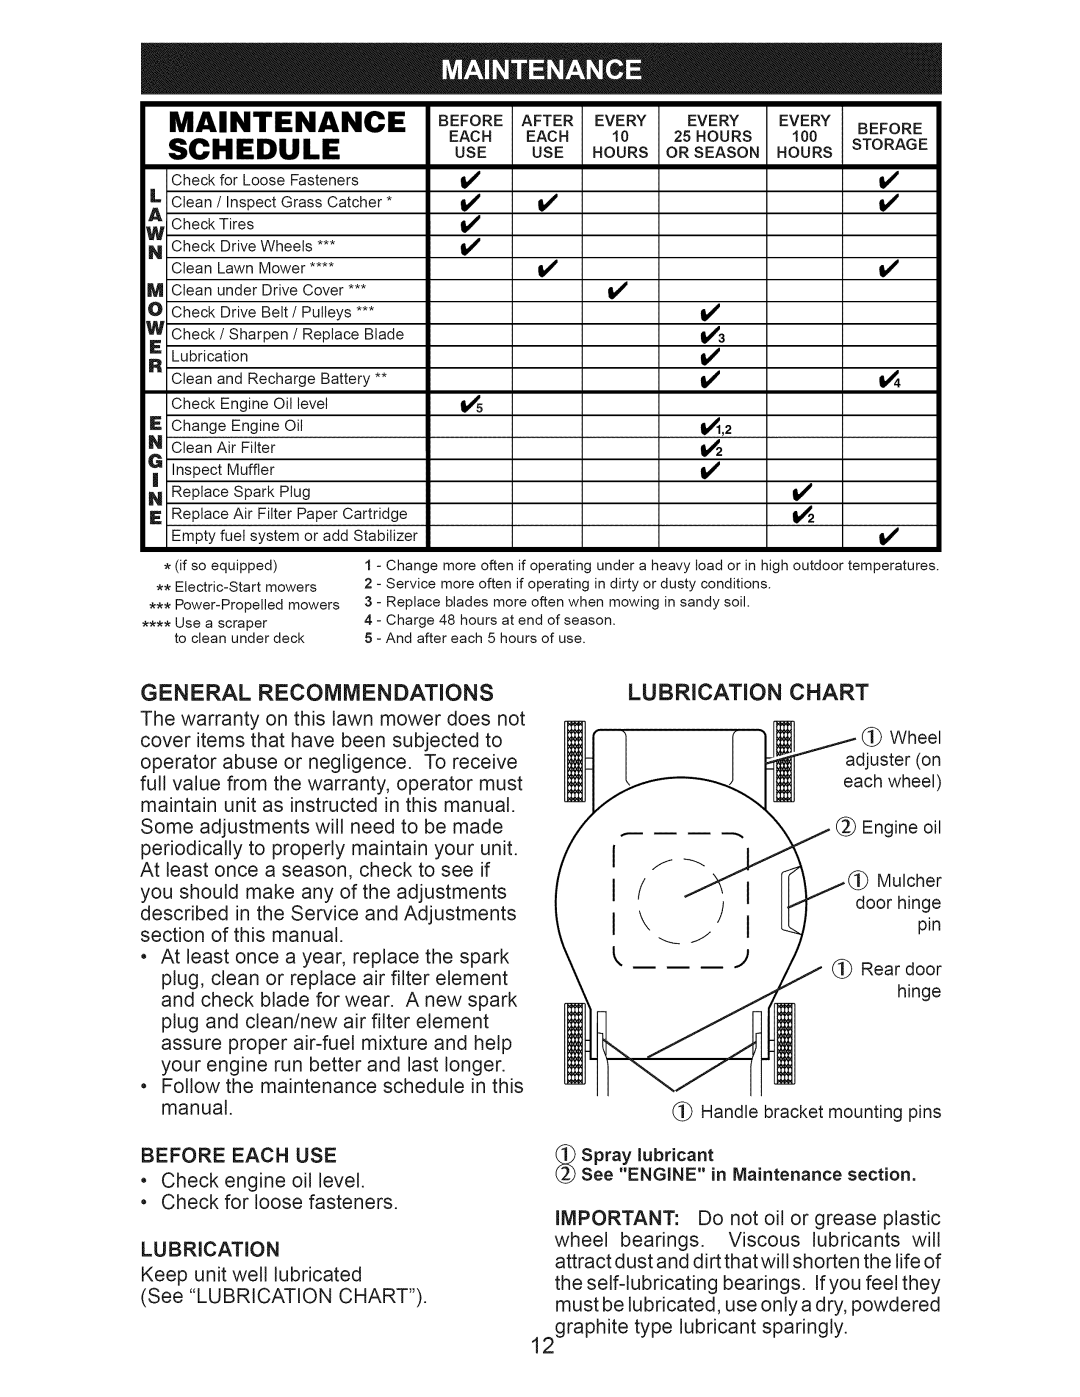 Craftsman 917.370620 owner manual Maintenance, Schedule, Use Hours 